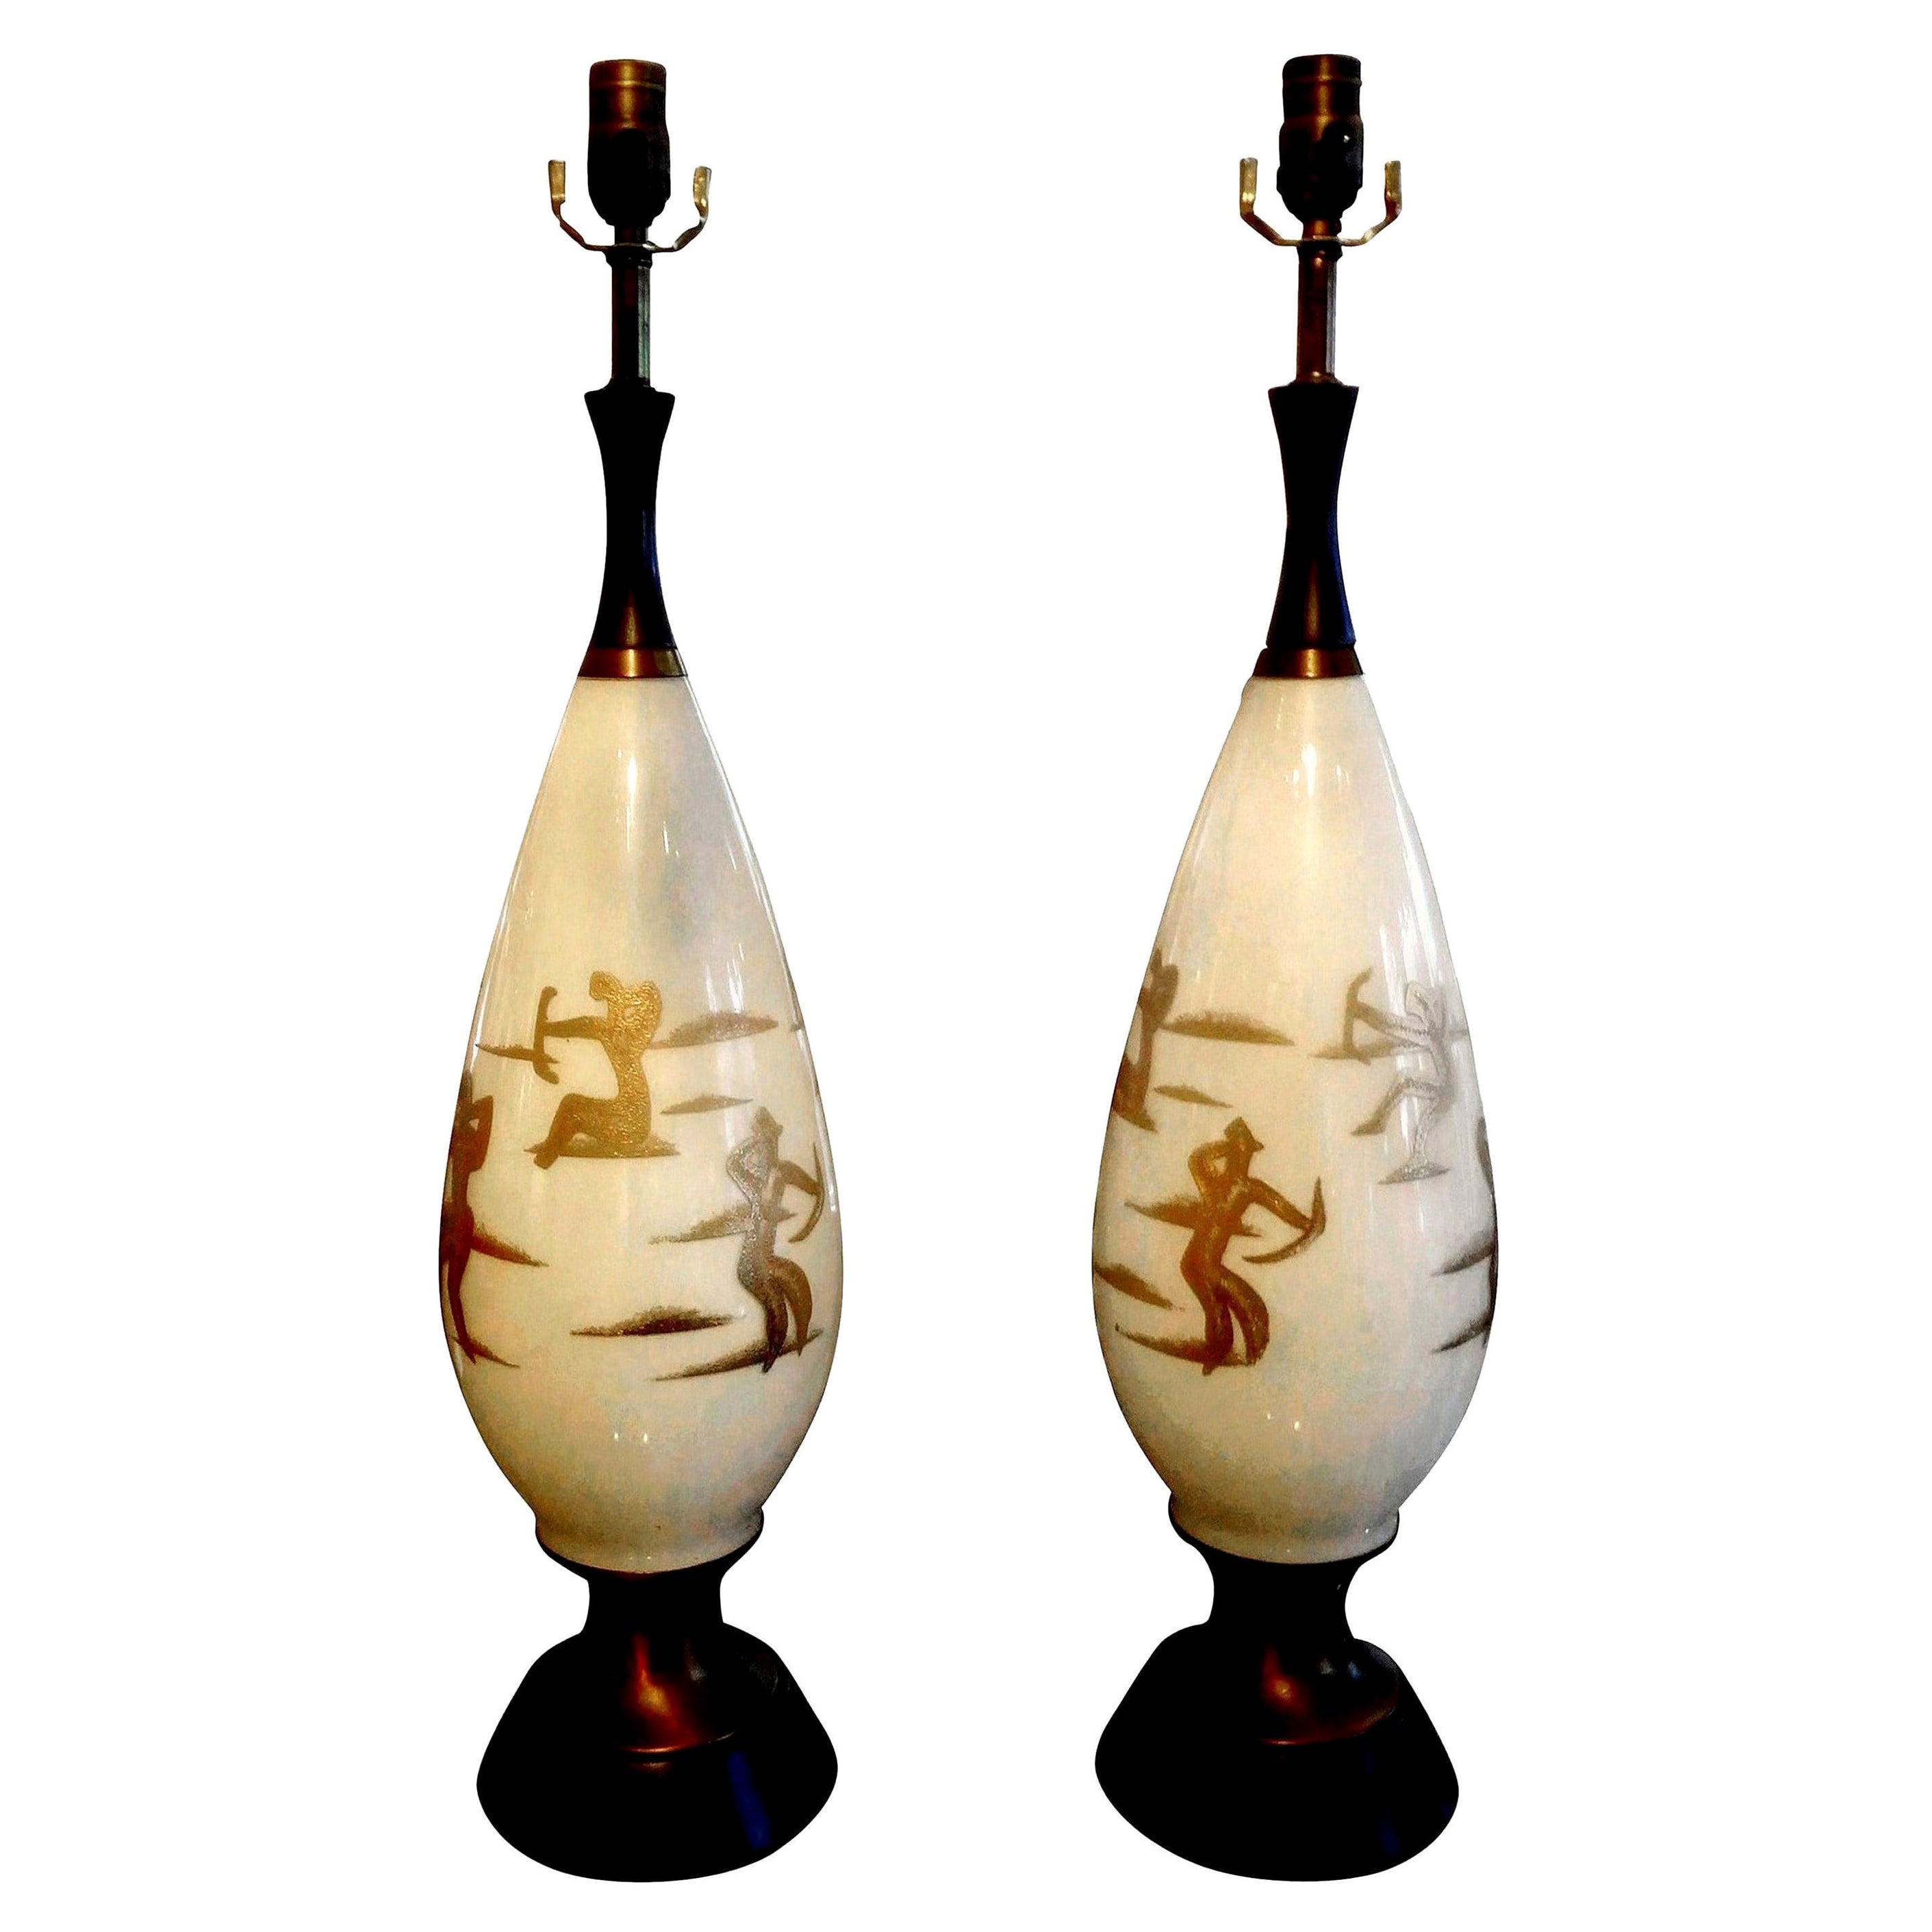 Pair of Midcentury White Glass Lamps with Abstract Gilt Decoration